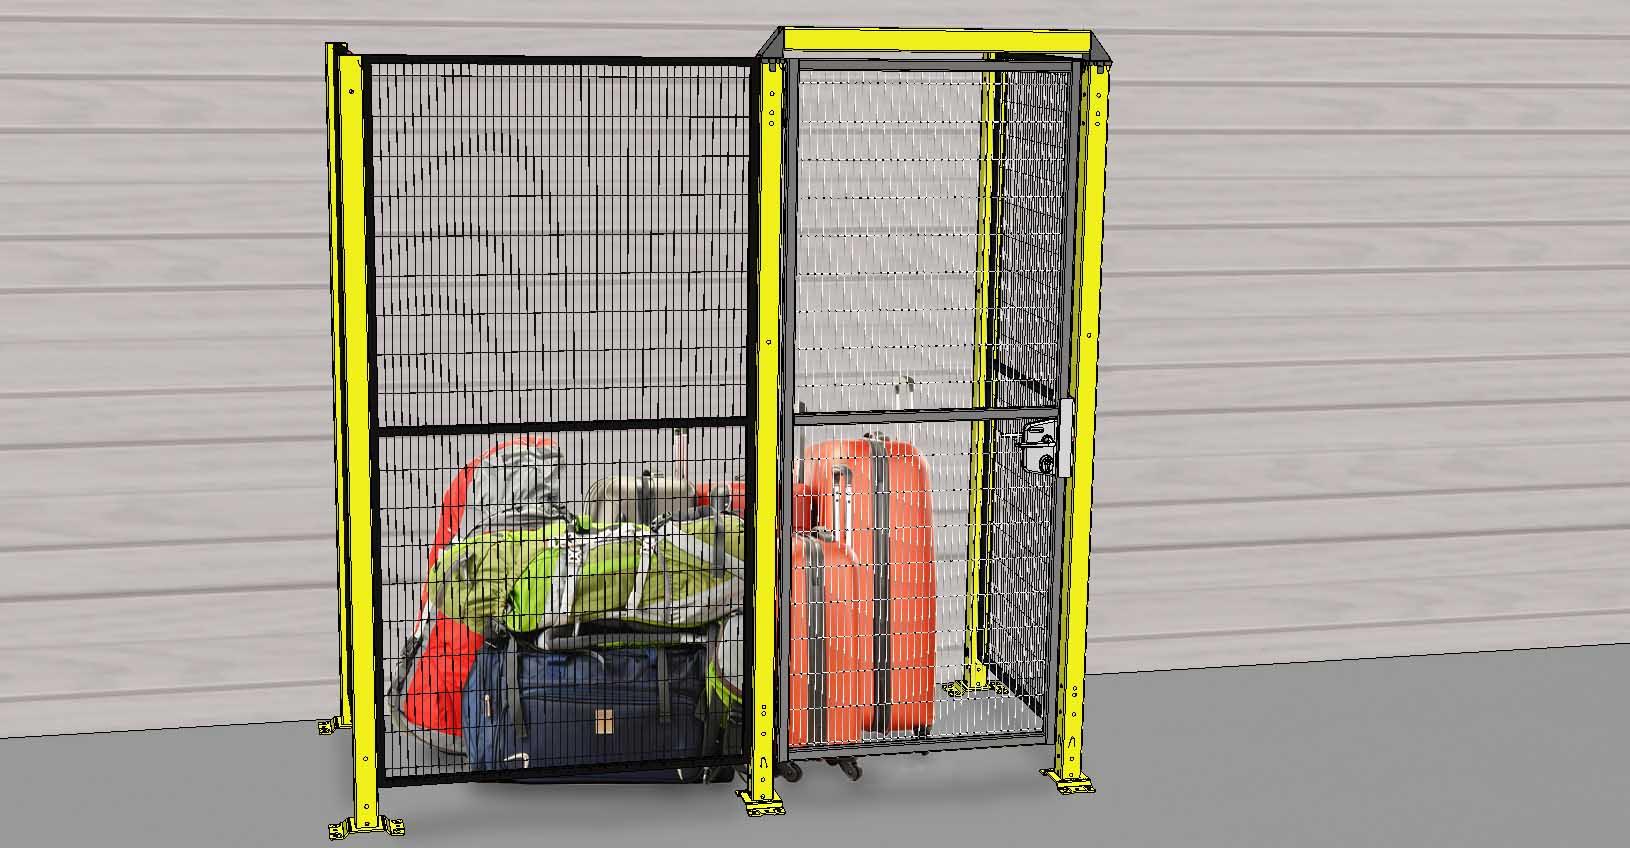 Suppliers of Asset Protection Cages